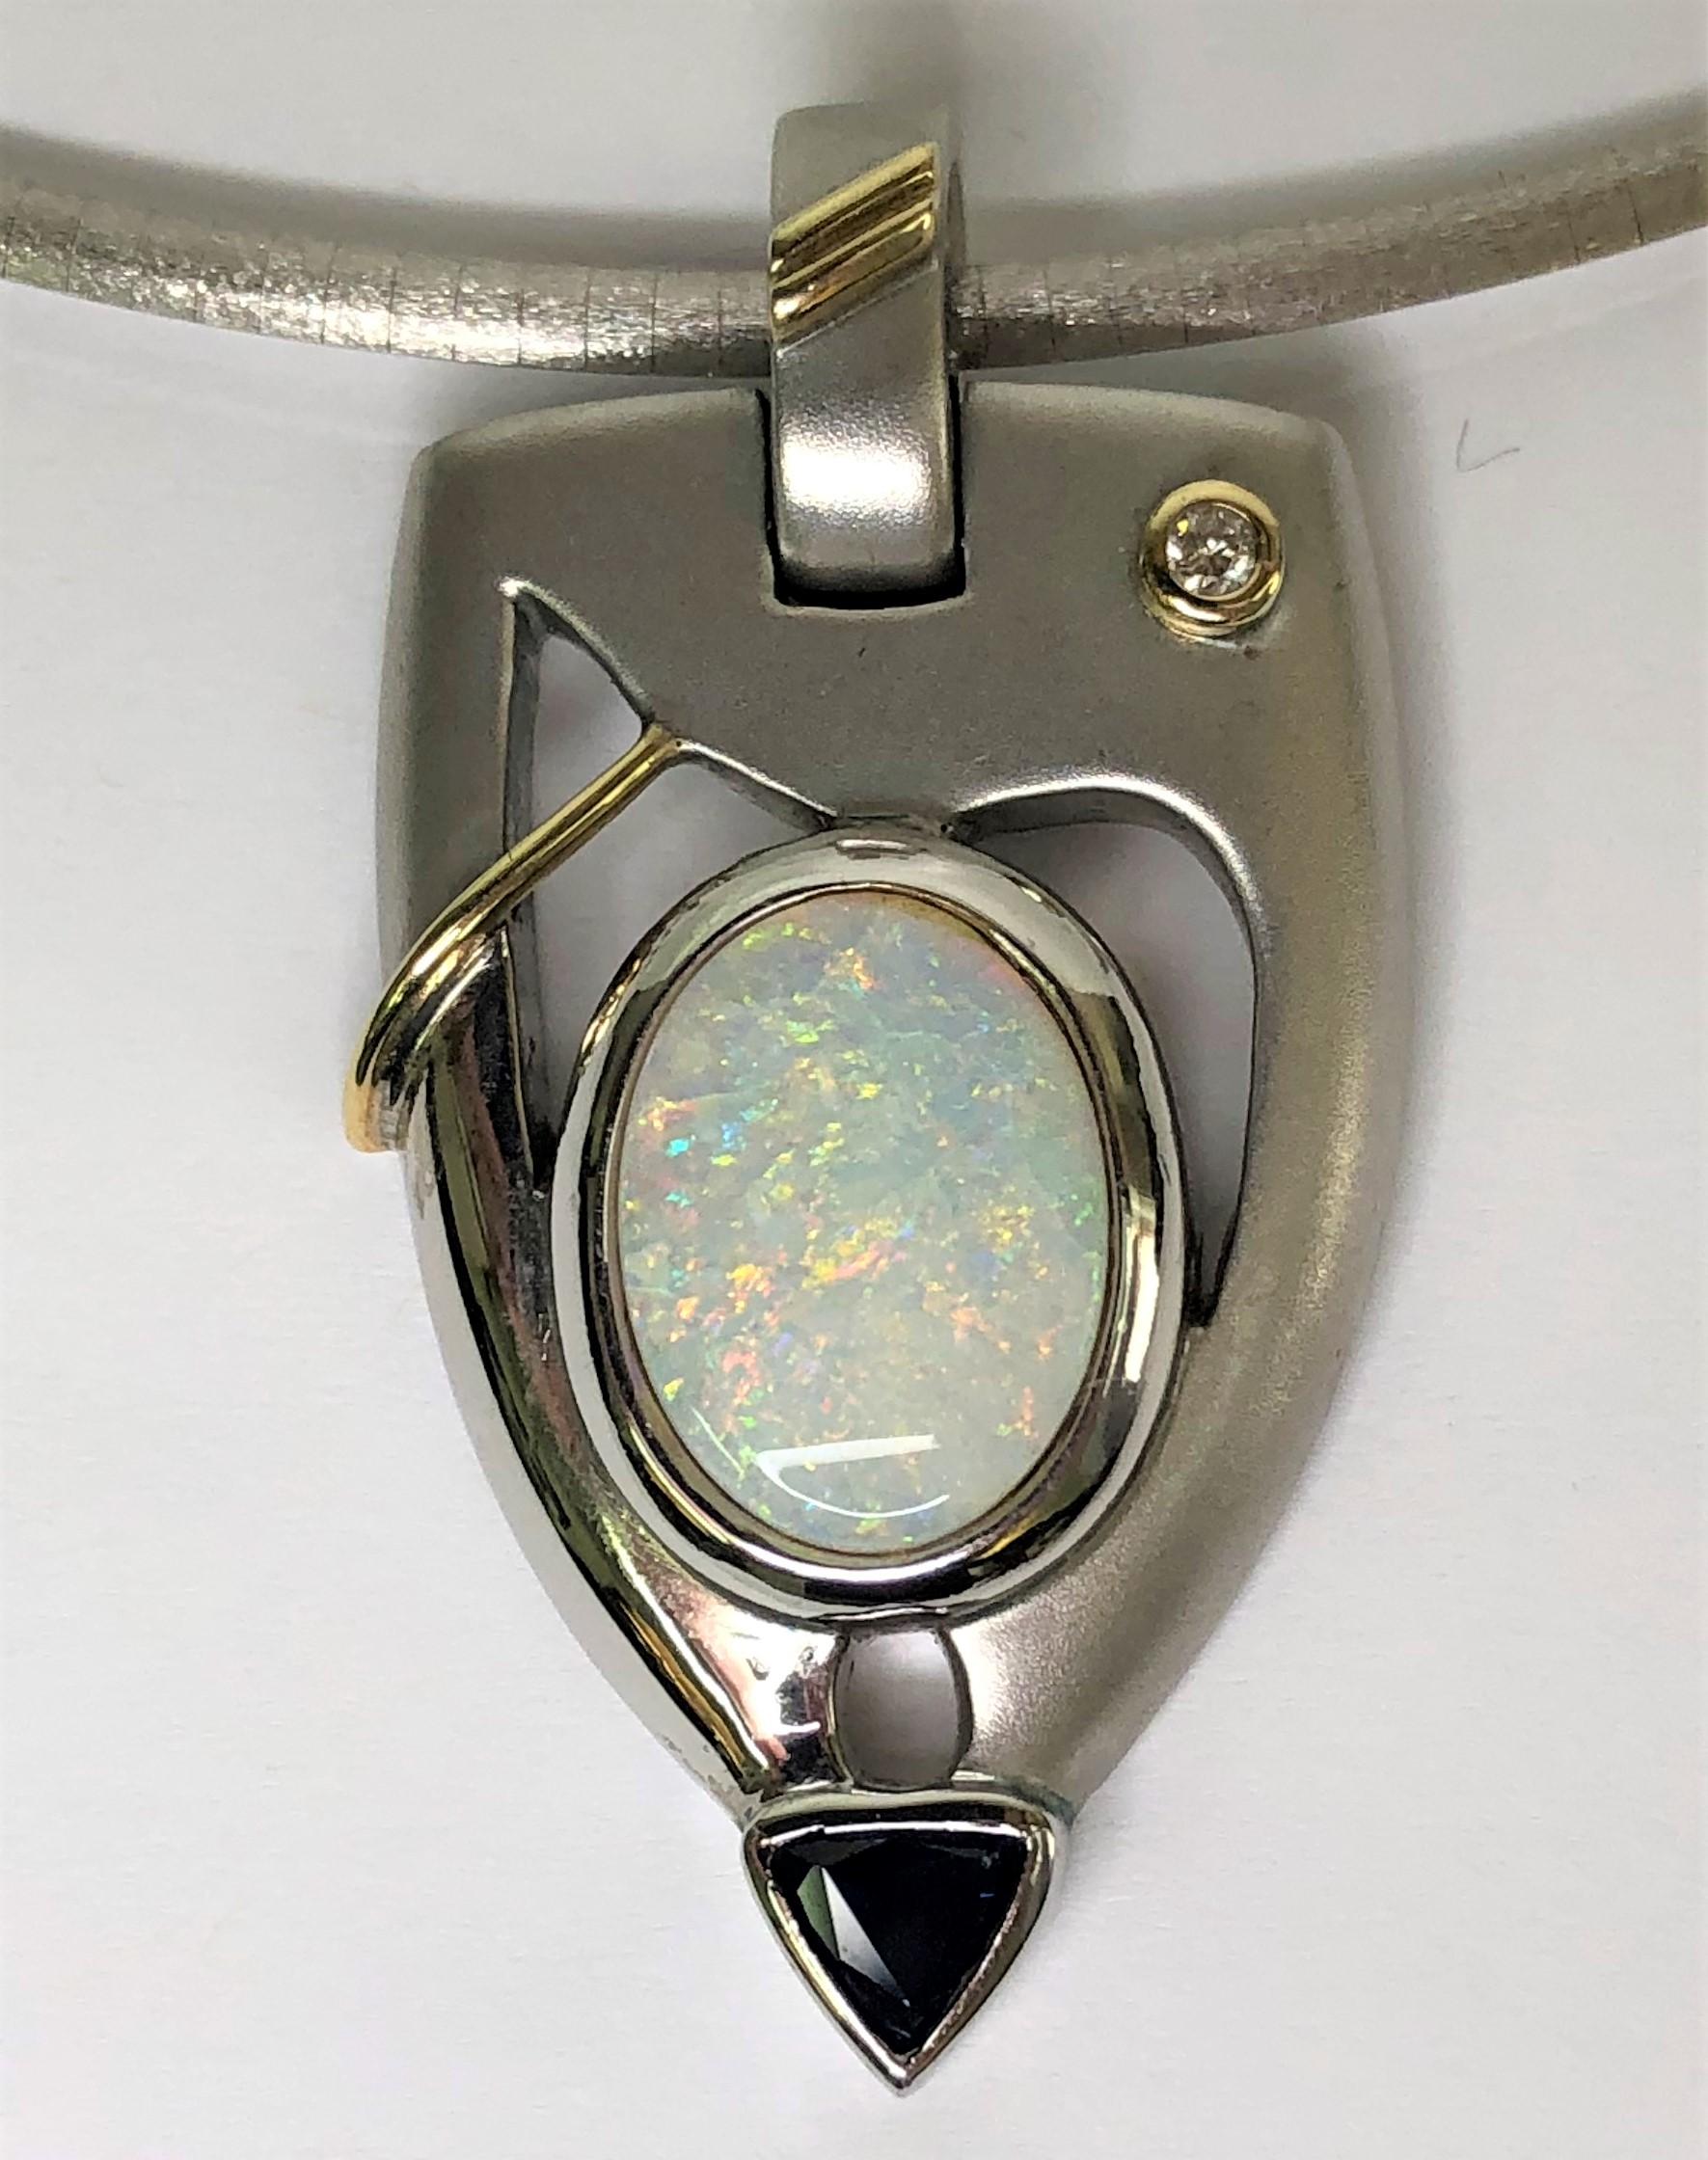 ONE-OF-A-KIND beautifully crafted pendant that makes a statement!
Silver and 18K gold 'arrow' shaped pendant
Oval white opal with red, orange, blue and green play of color, bezel set, approximately 13mm x 10mm.
Round bezel set diamond, approximately